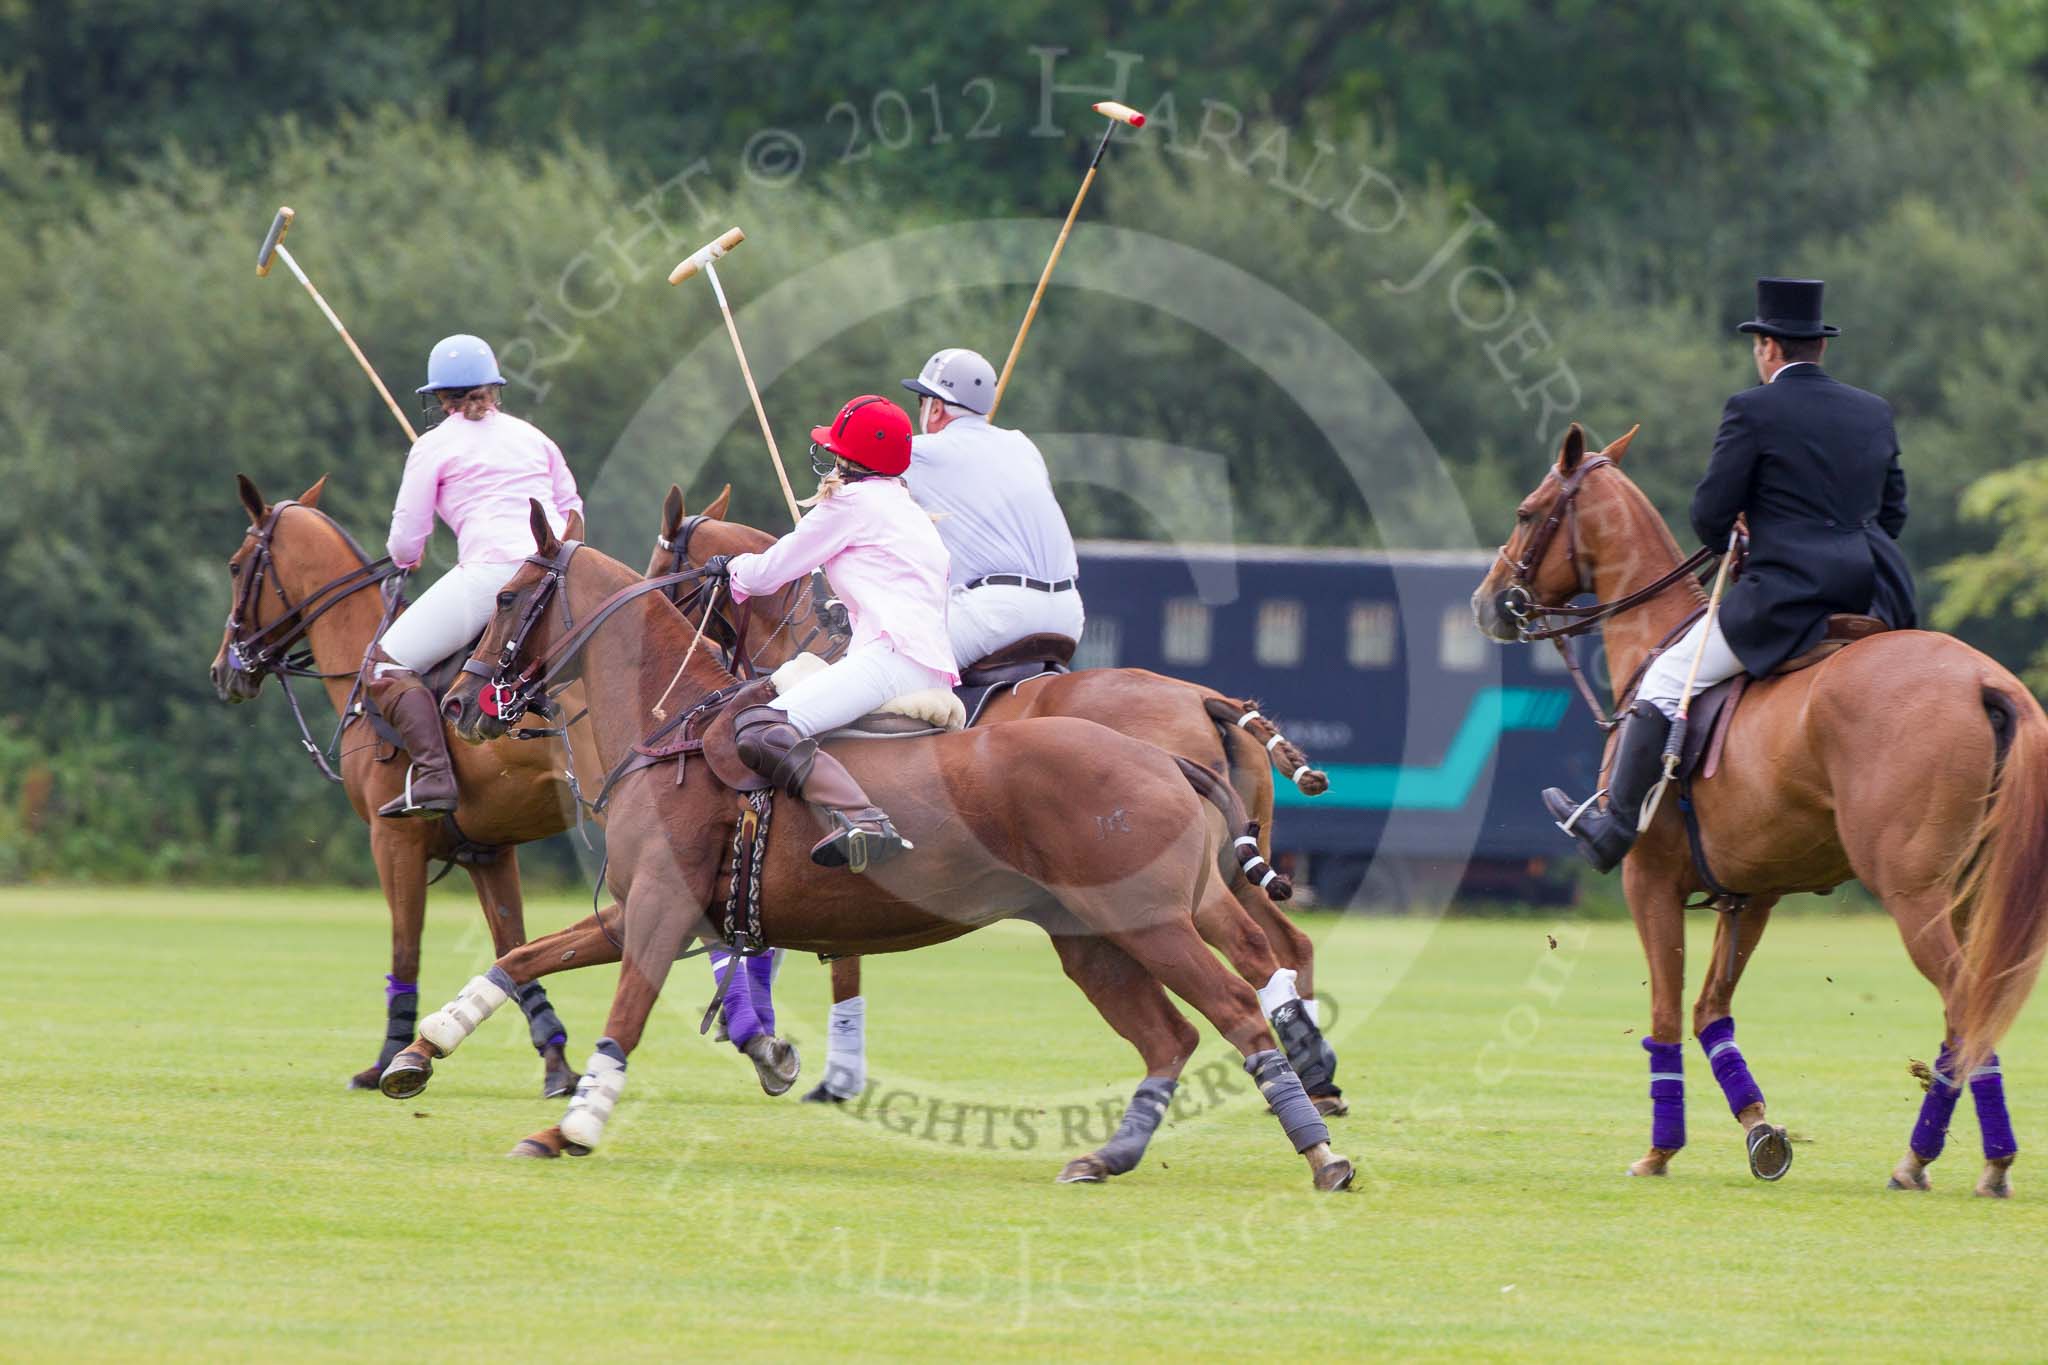 7th Heritage Polo Cup semi-finals: Team Emerging Switzerland..
Hurtwood Park Polo Club,
Ewhurst Green,
Surrey,
United Kingdom,
on 04 August 2012 at 11:07, image #13